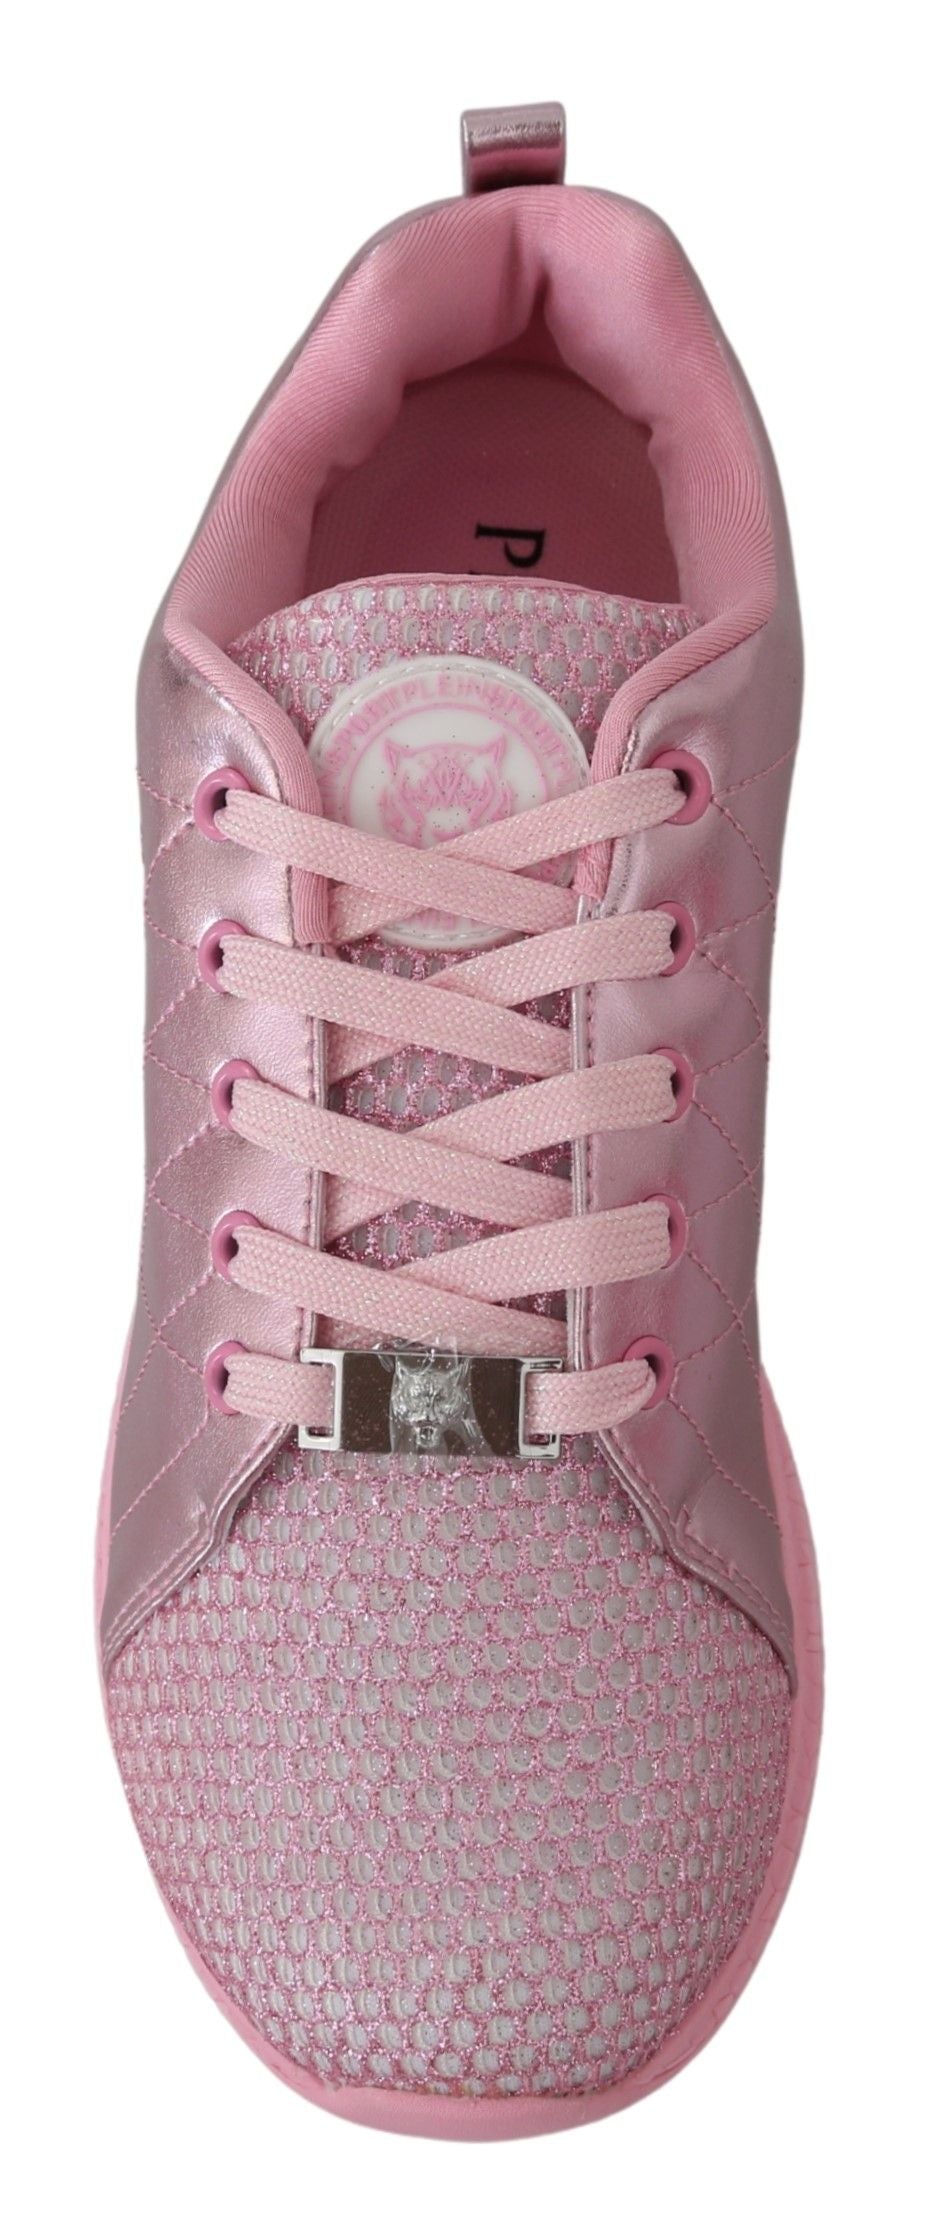 Plein Sport Pink Blush Polyester Runner Gisella Sneakers Shoes